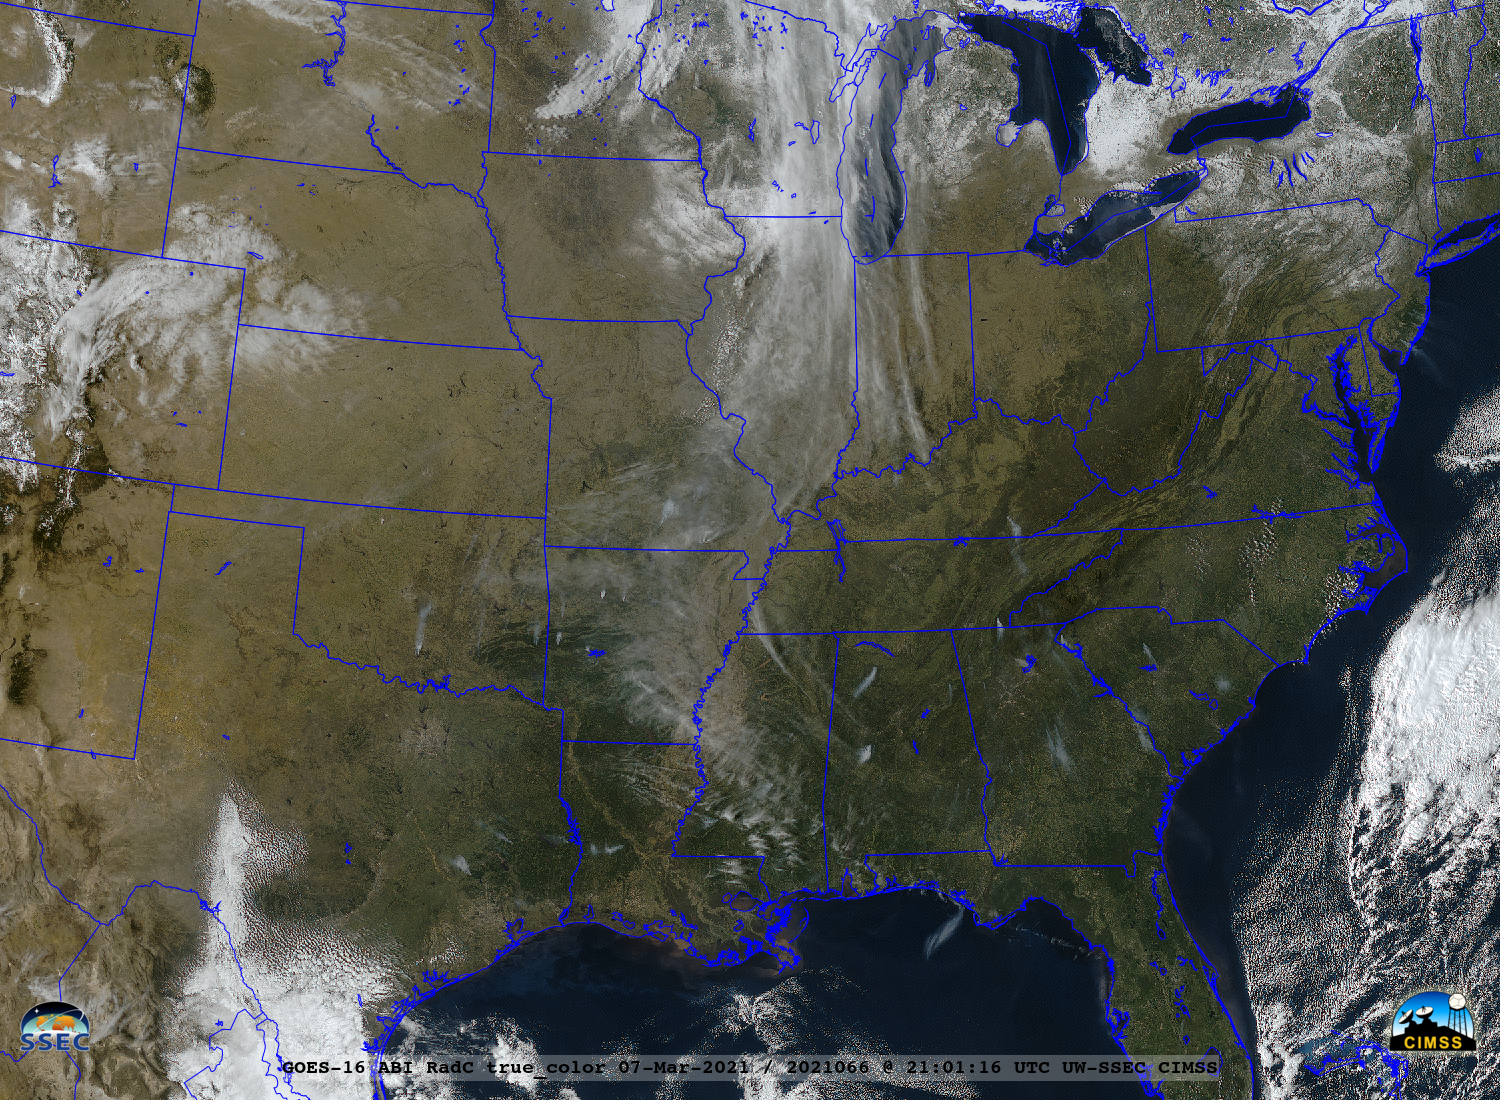 GOES-16 True Color RGB images [click to play animation | MP4]